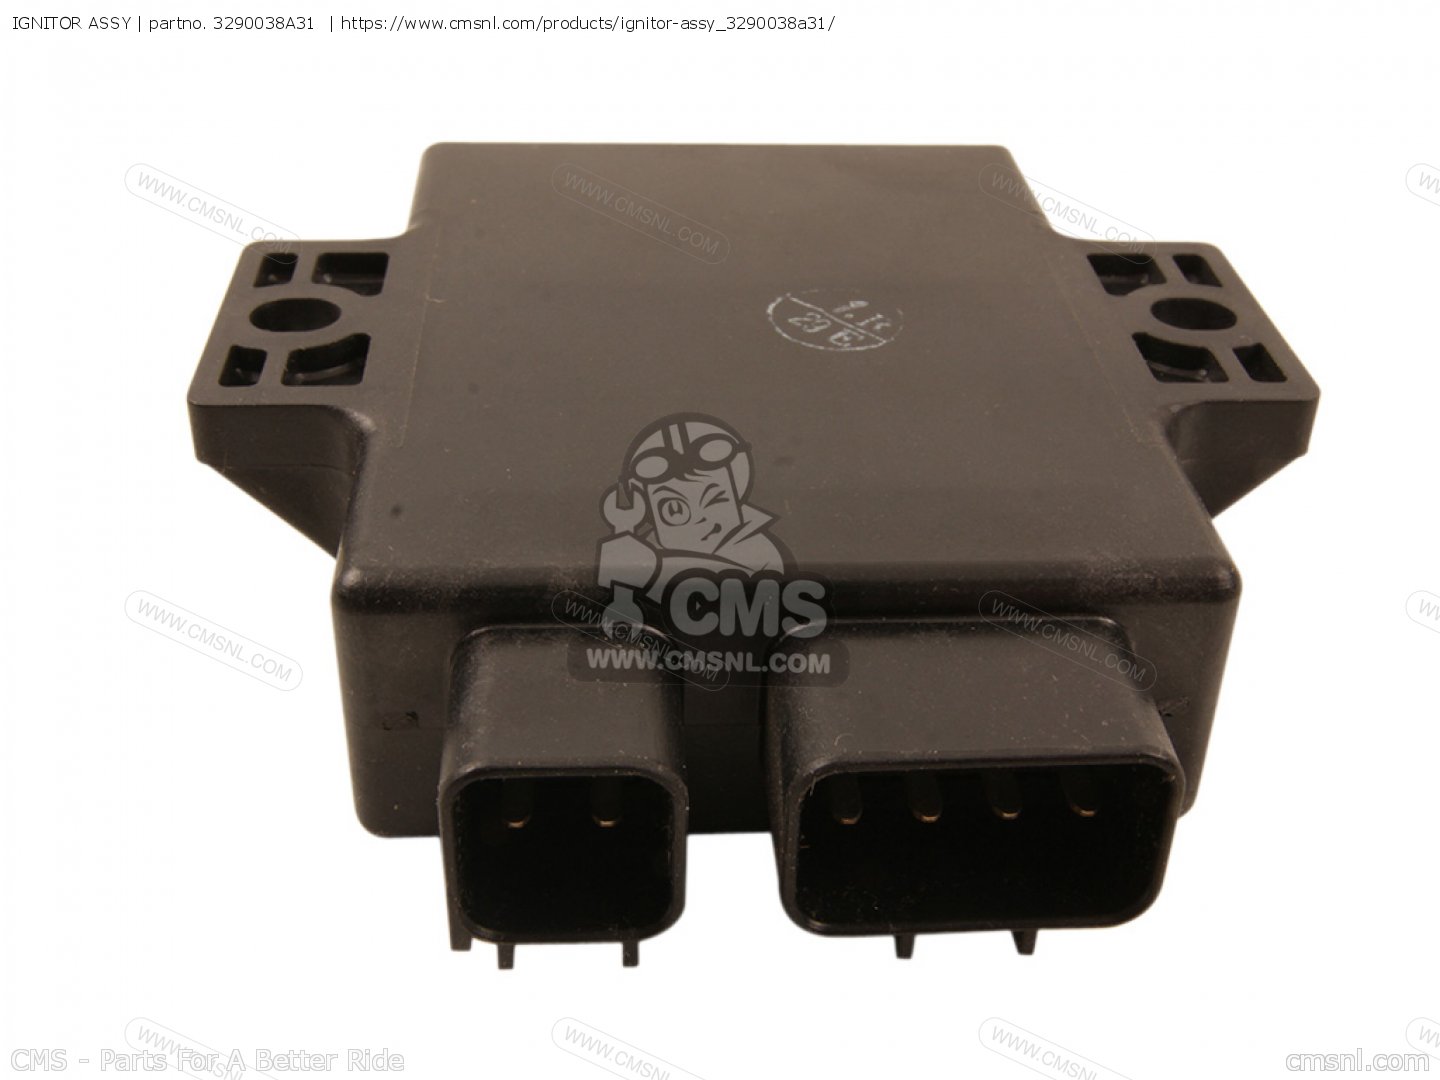 3290038A31: Ignitor Assy Suzuki - buy the 32900-38A31 at CMSNL